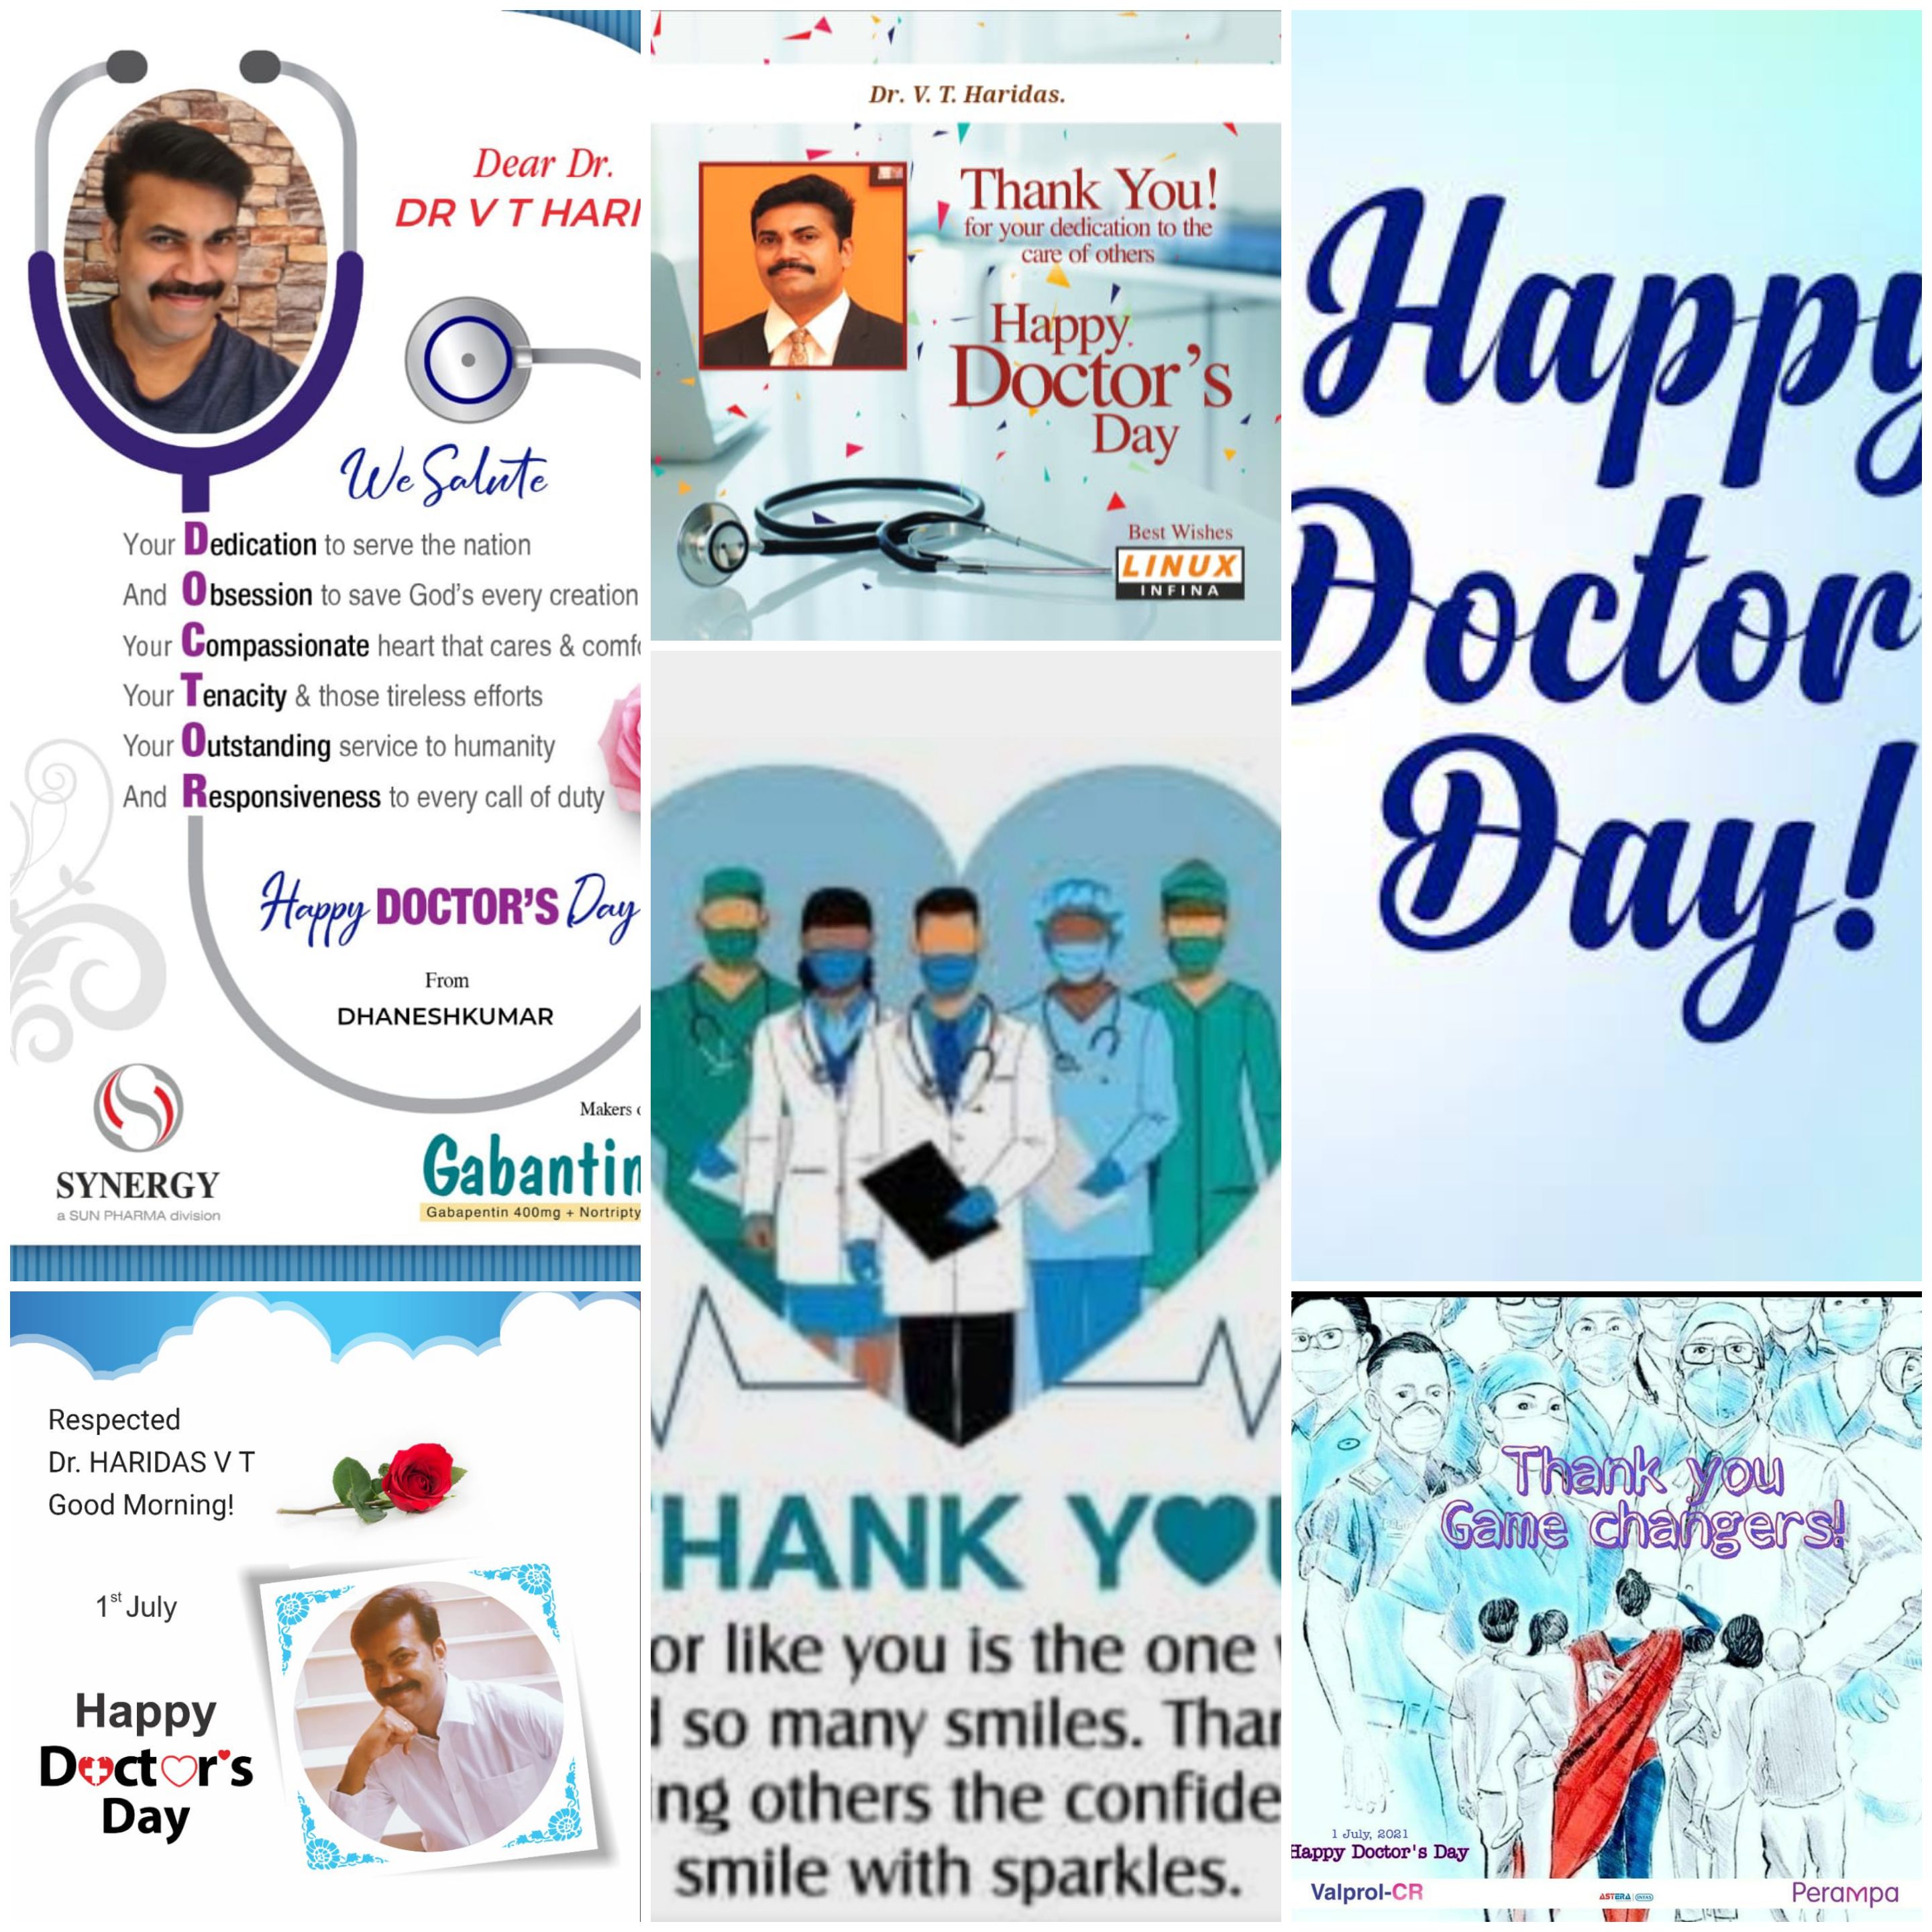 Doctor’s day once again — but , will there be a change?